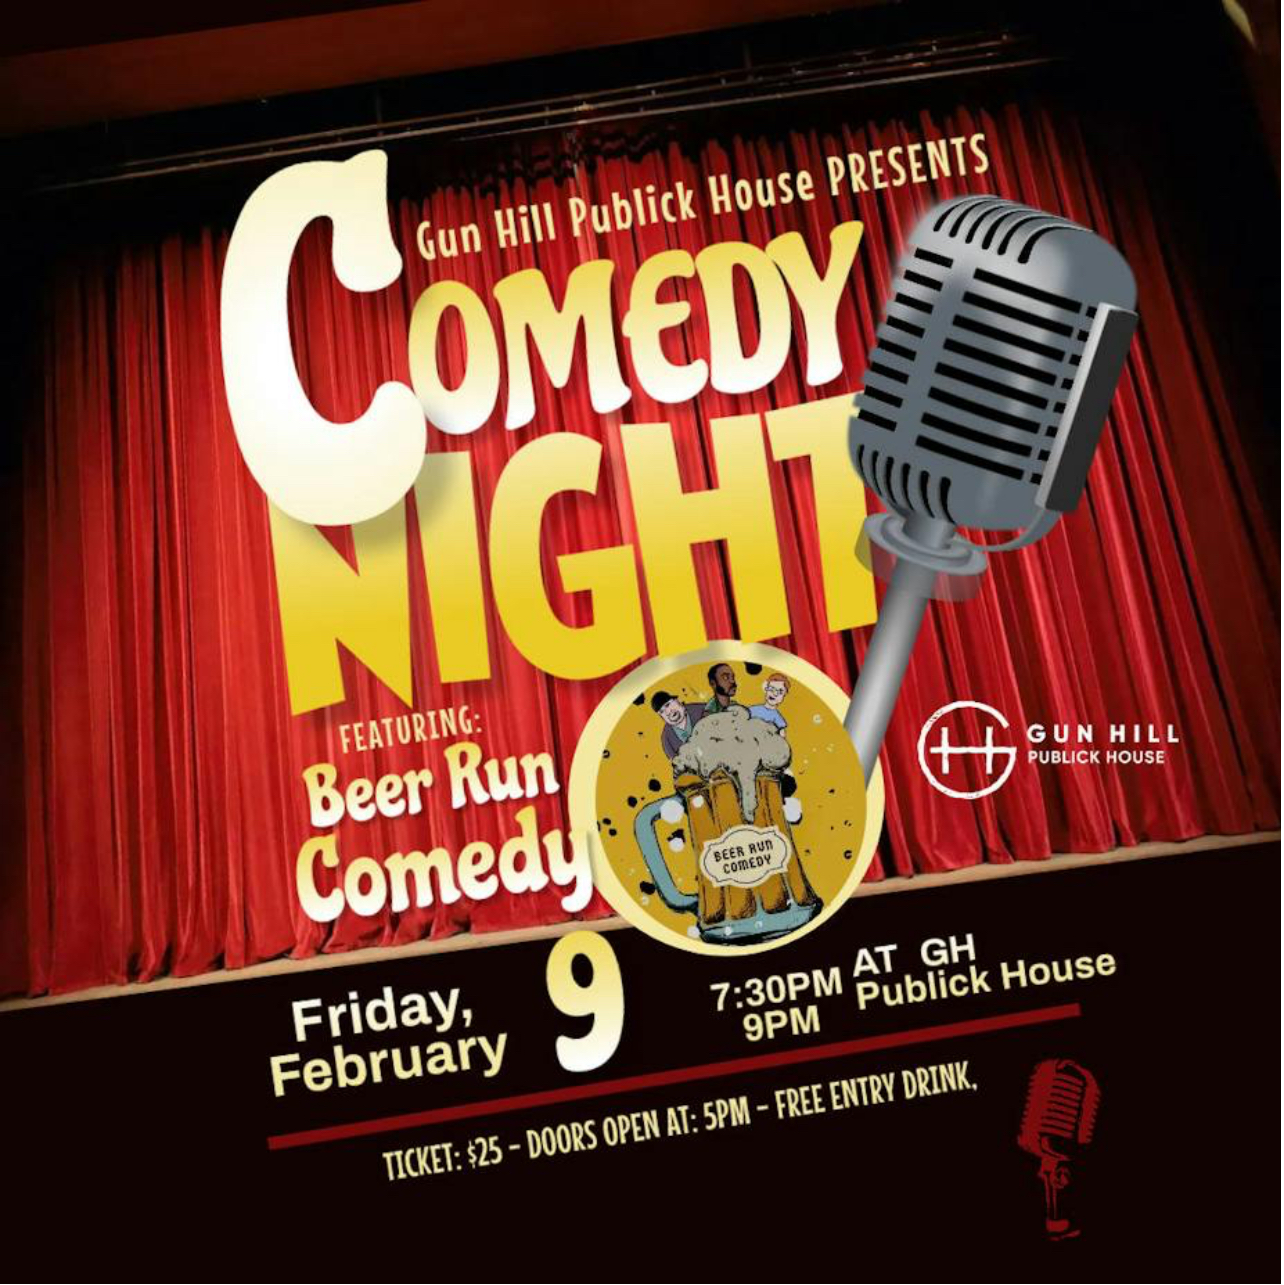 A flyer for a comedy night.